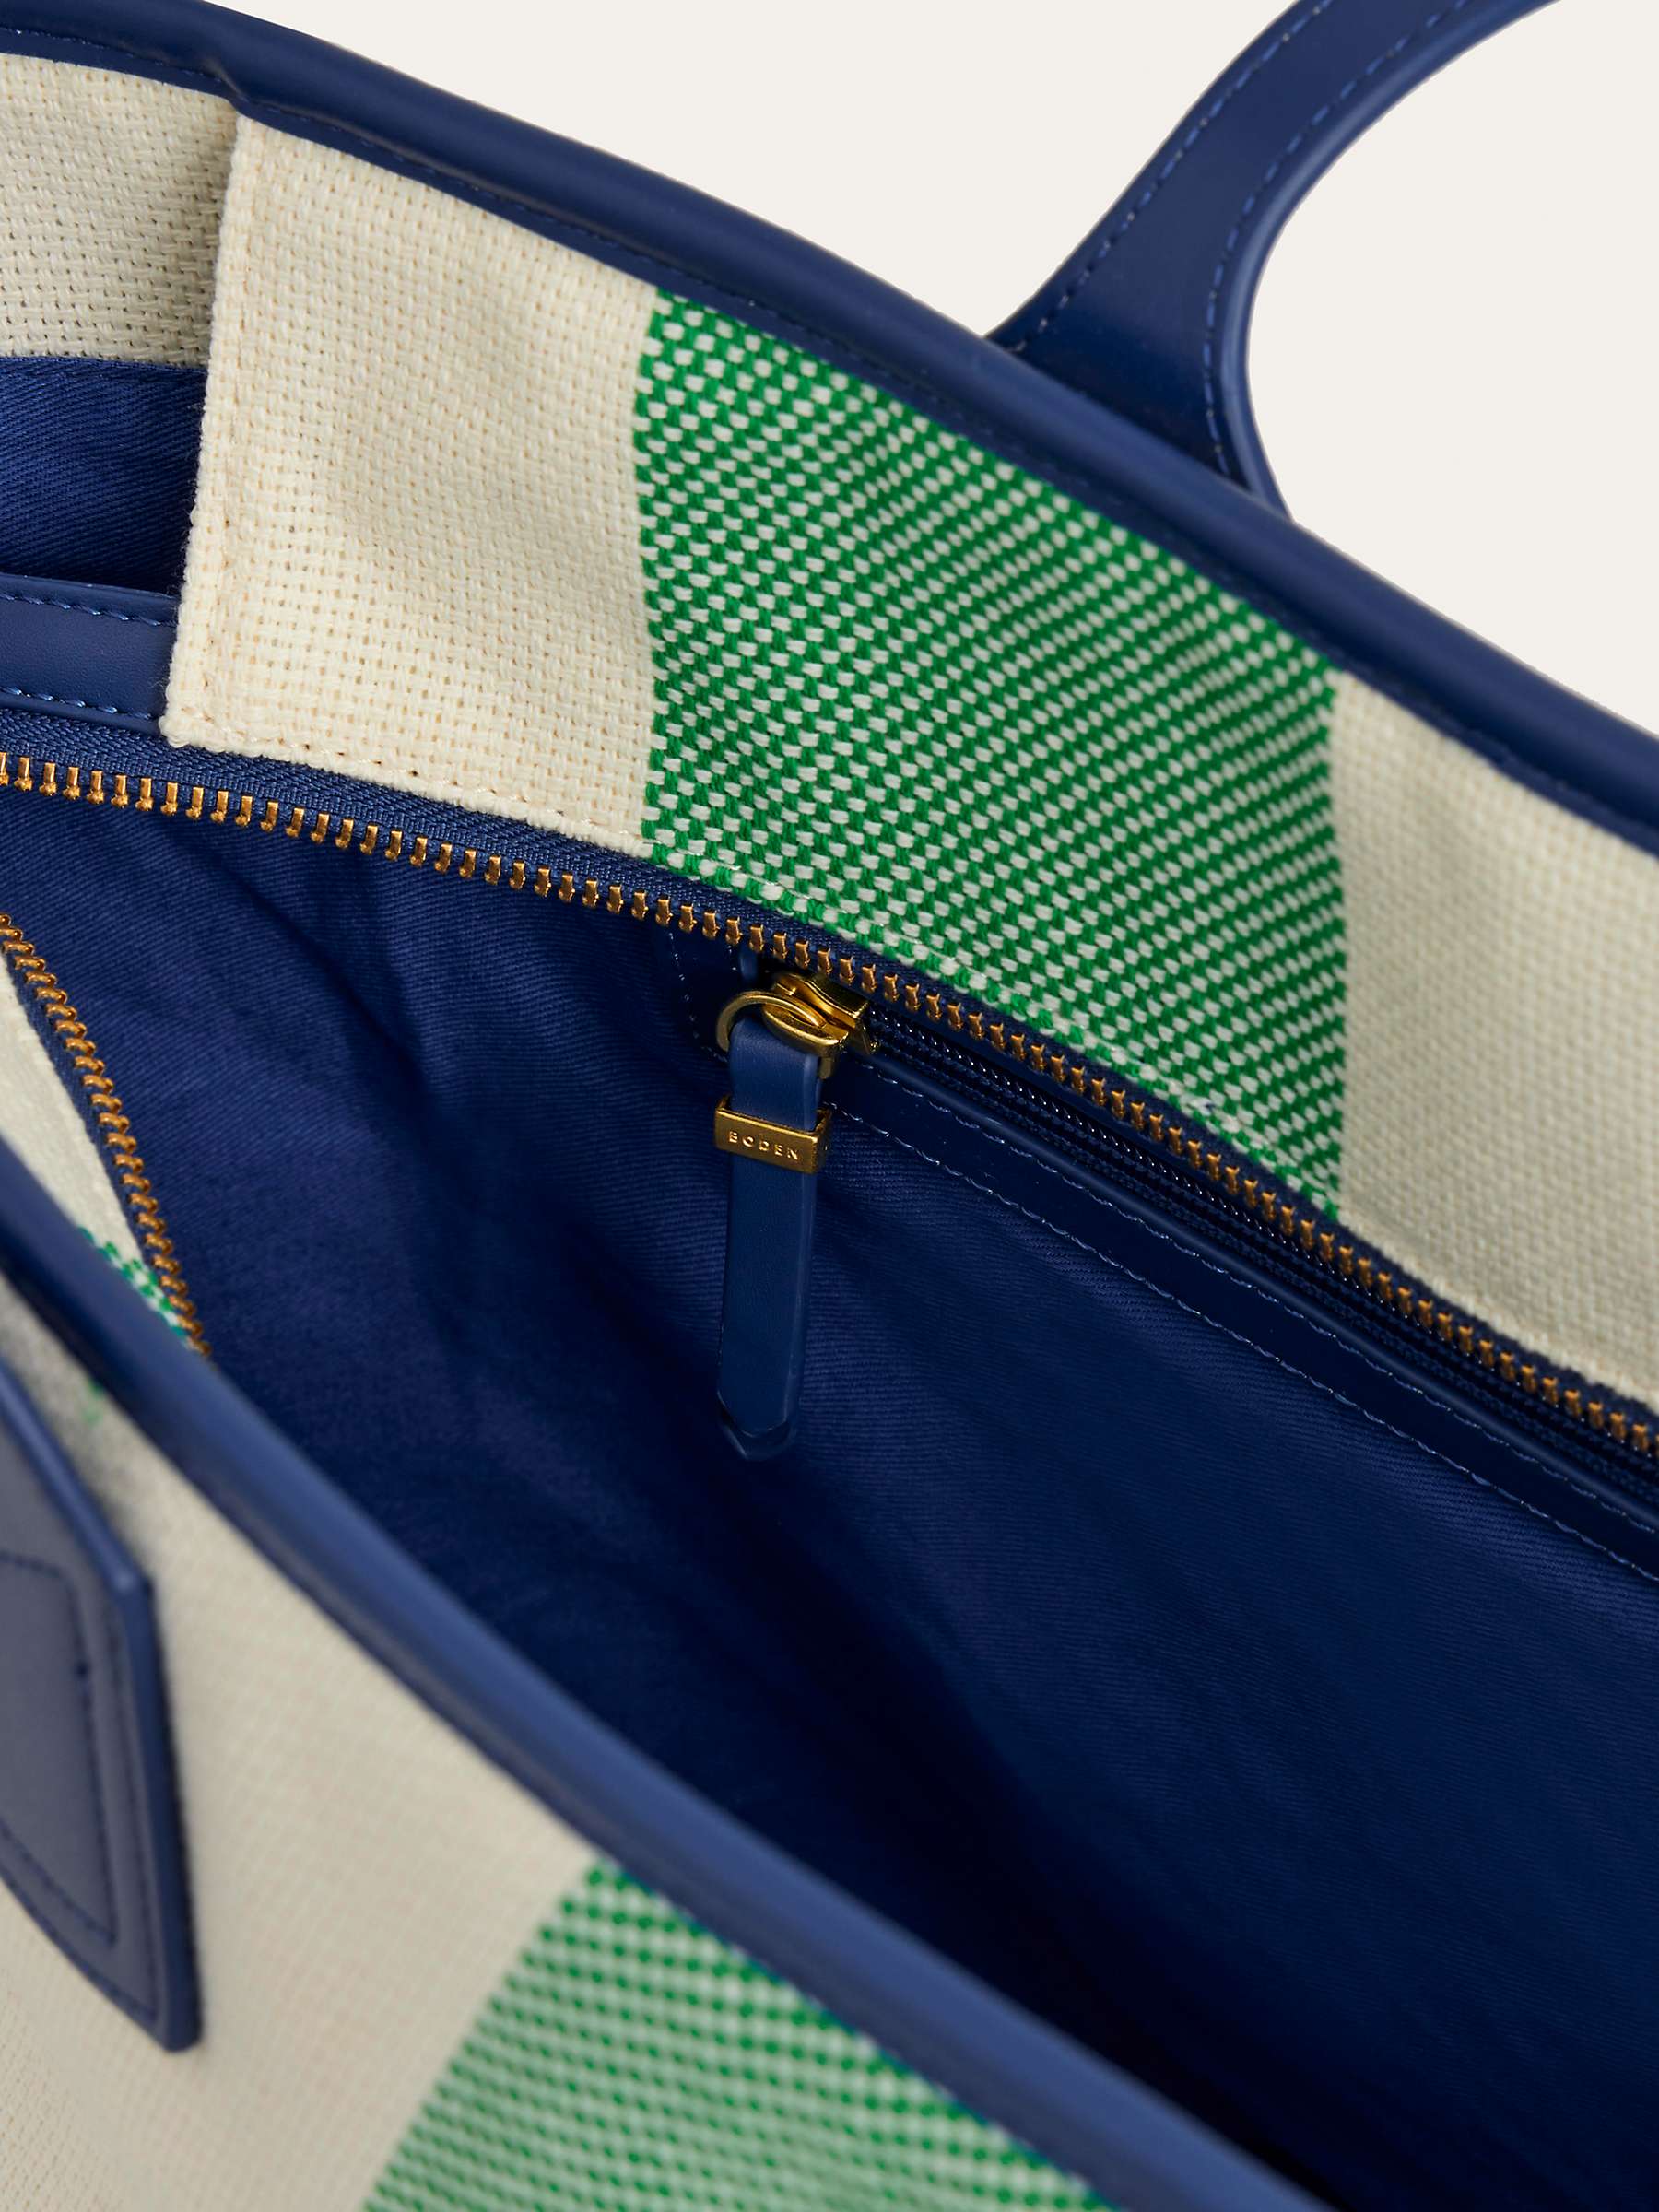 Buy Boden Stripe Trapeze Tote Bag, Green/Multi Online at johnlewis.com